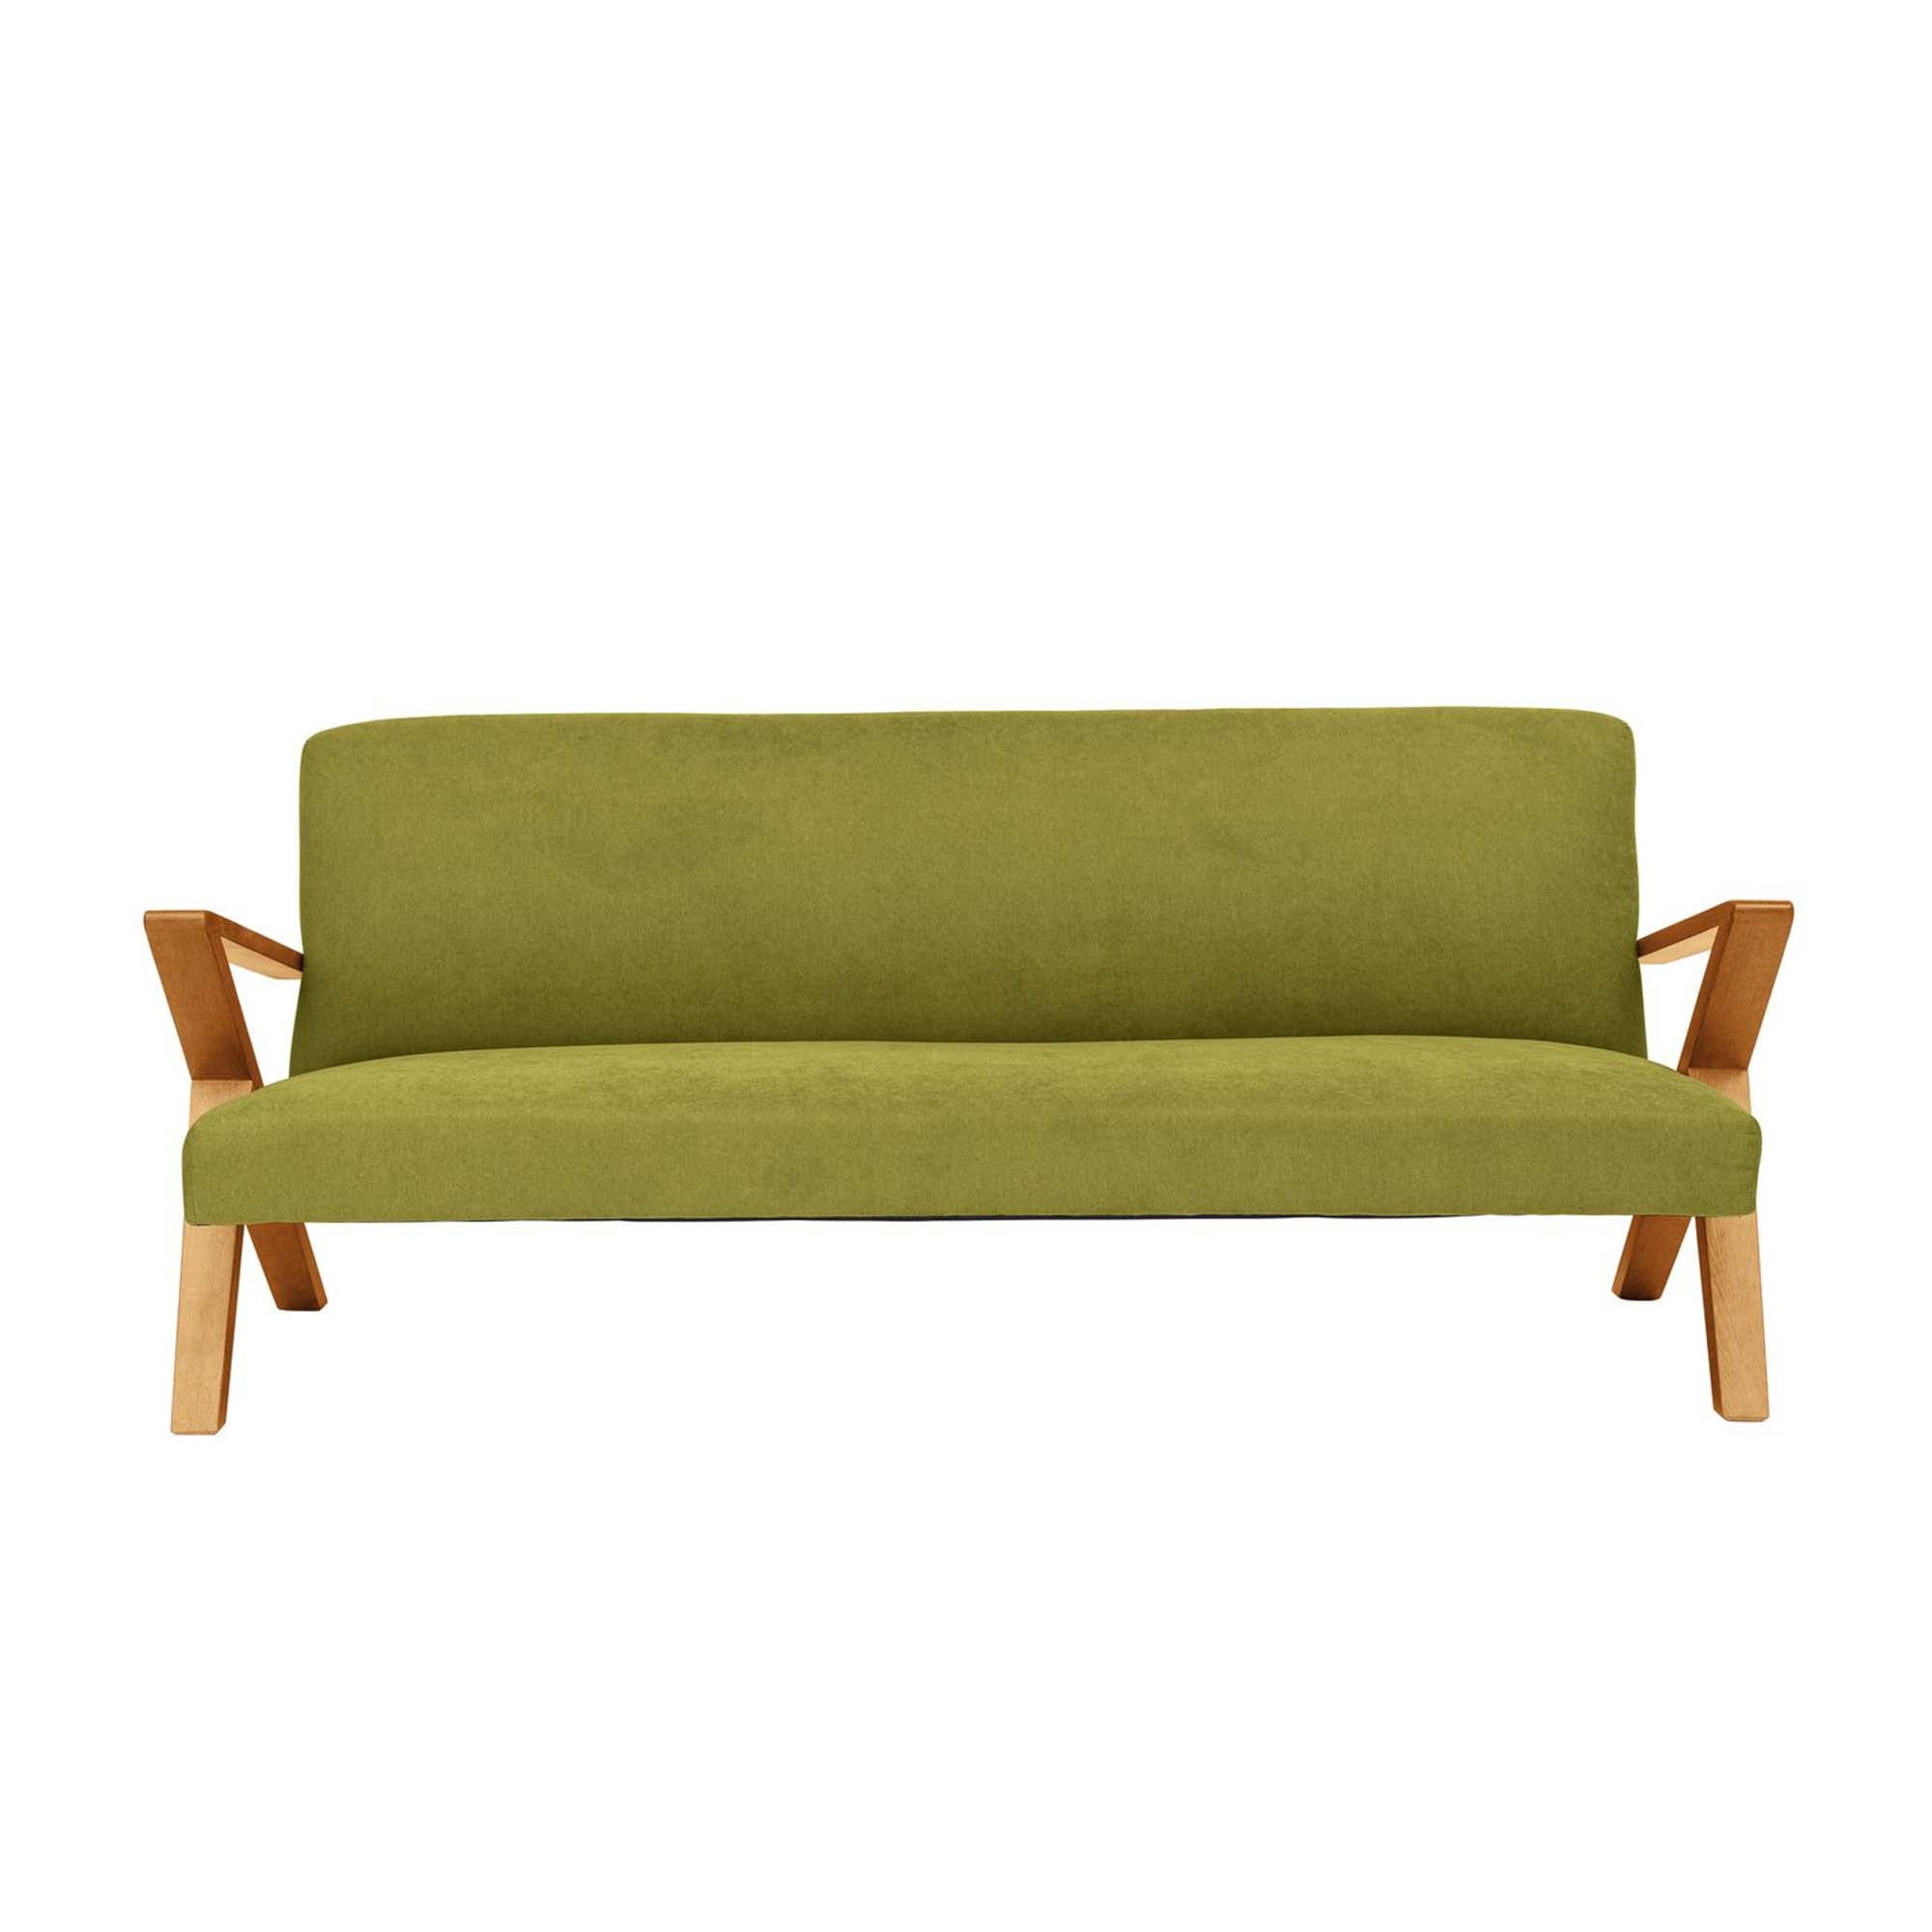 4-seater Sofa Beech Wood Frame, Oak Colour green fabric, front view